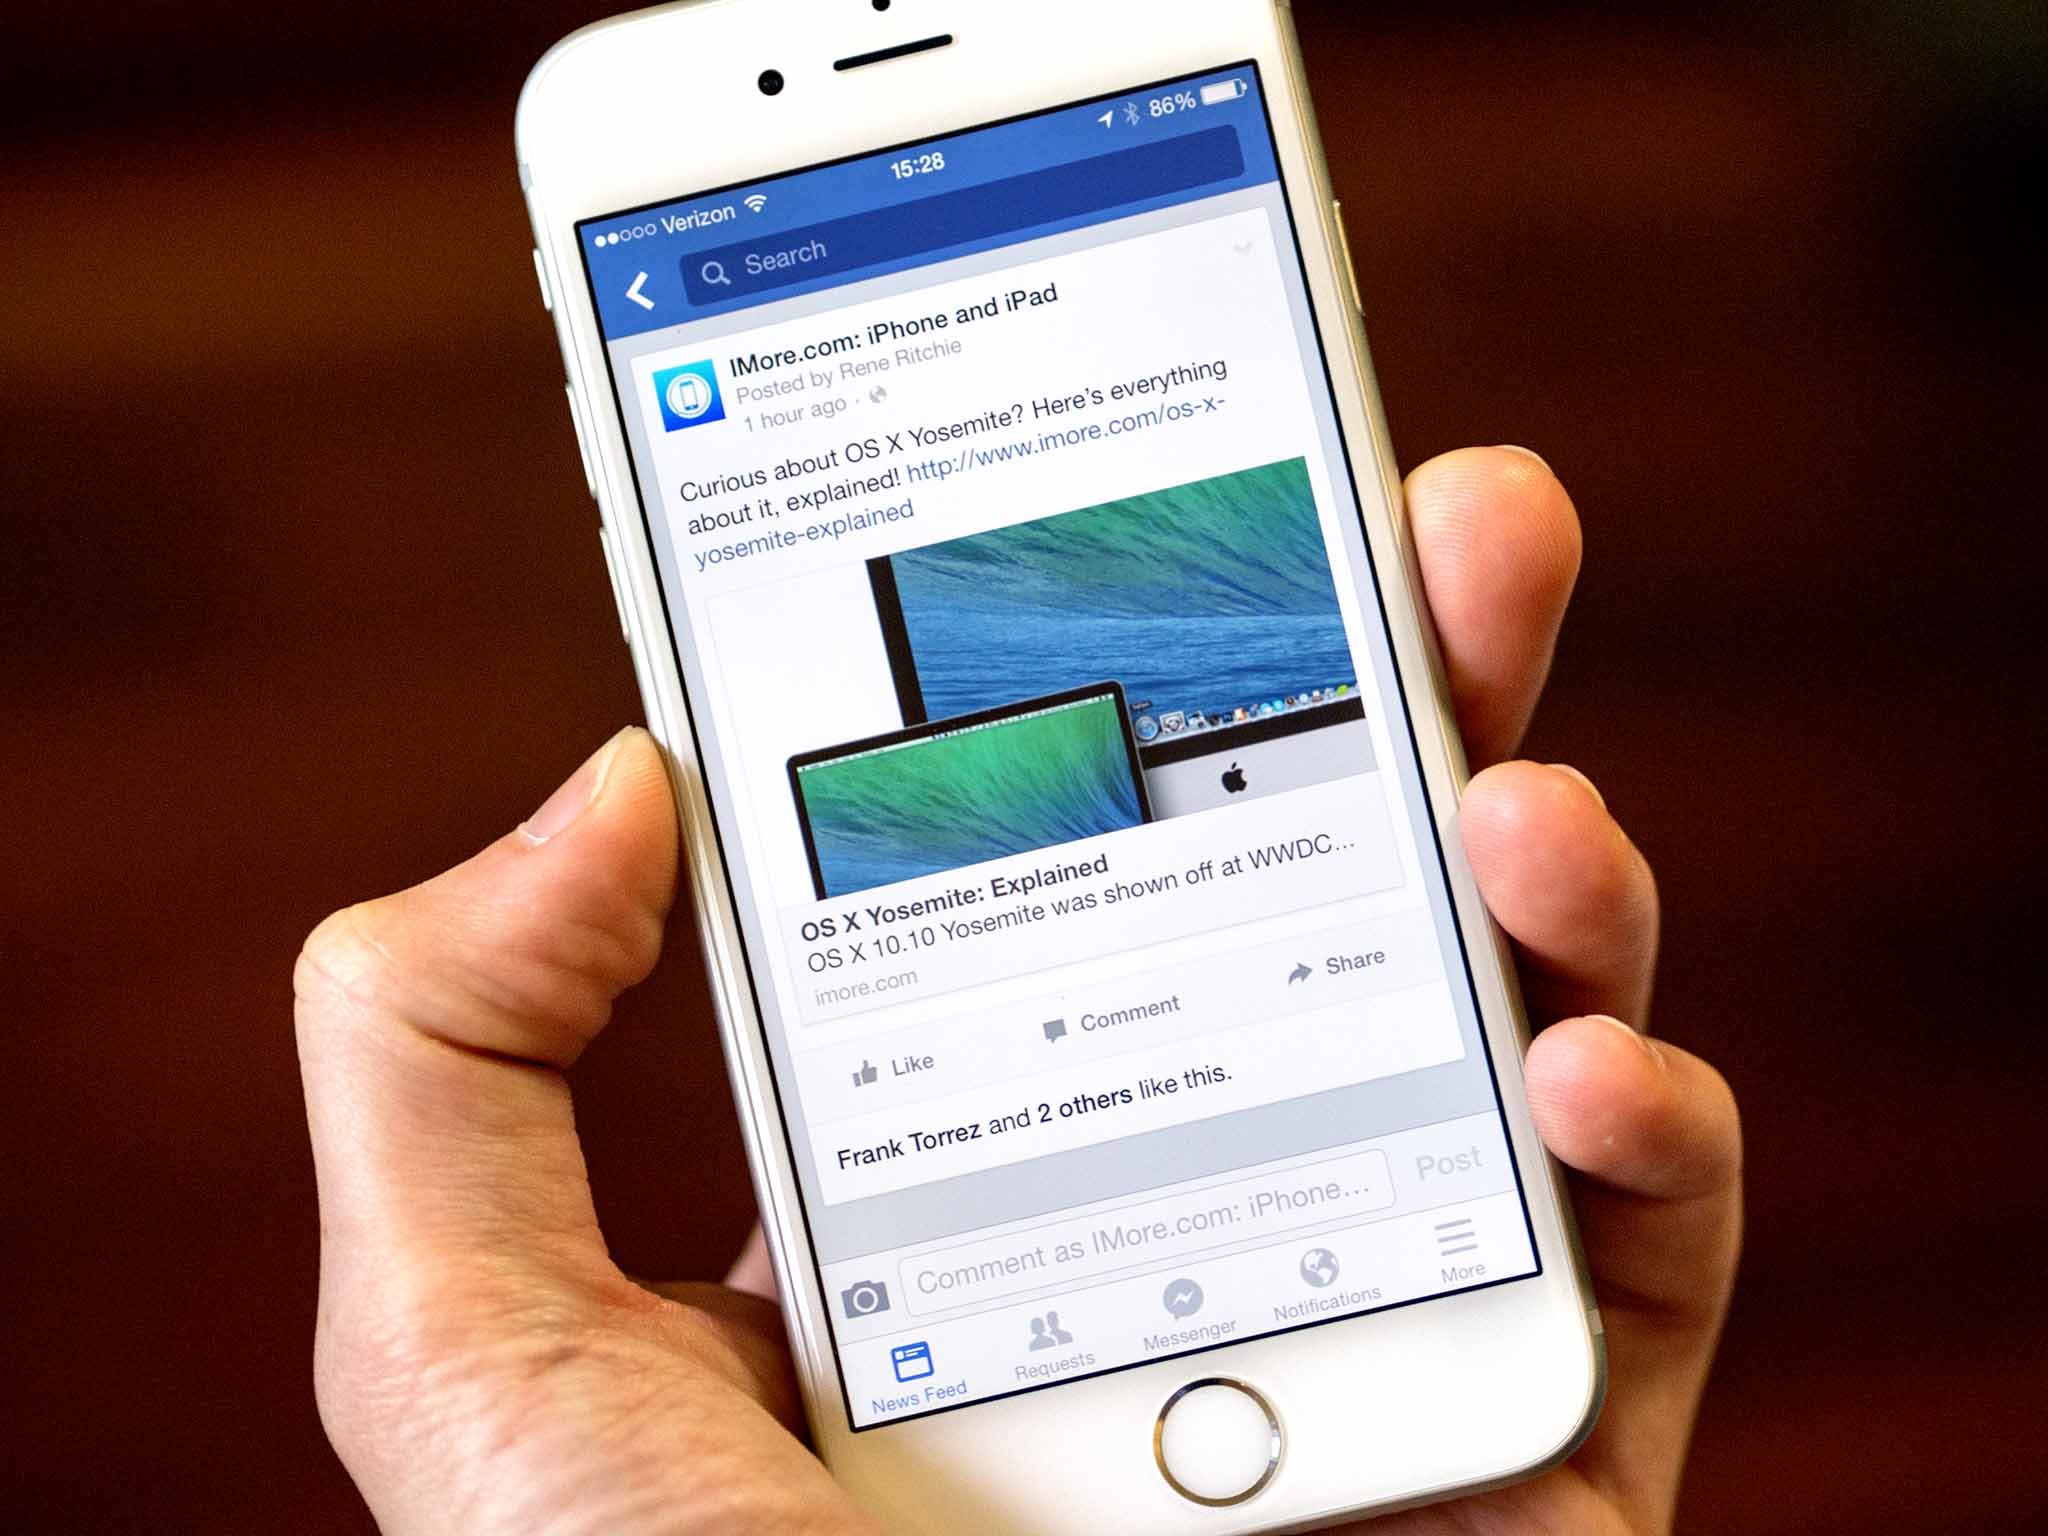 Facebook updated with tiny text for iPhone 6 and 6 Plus